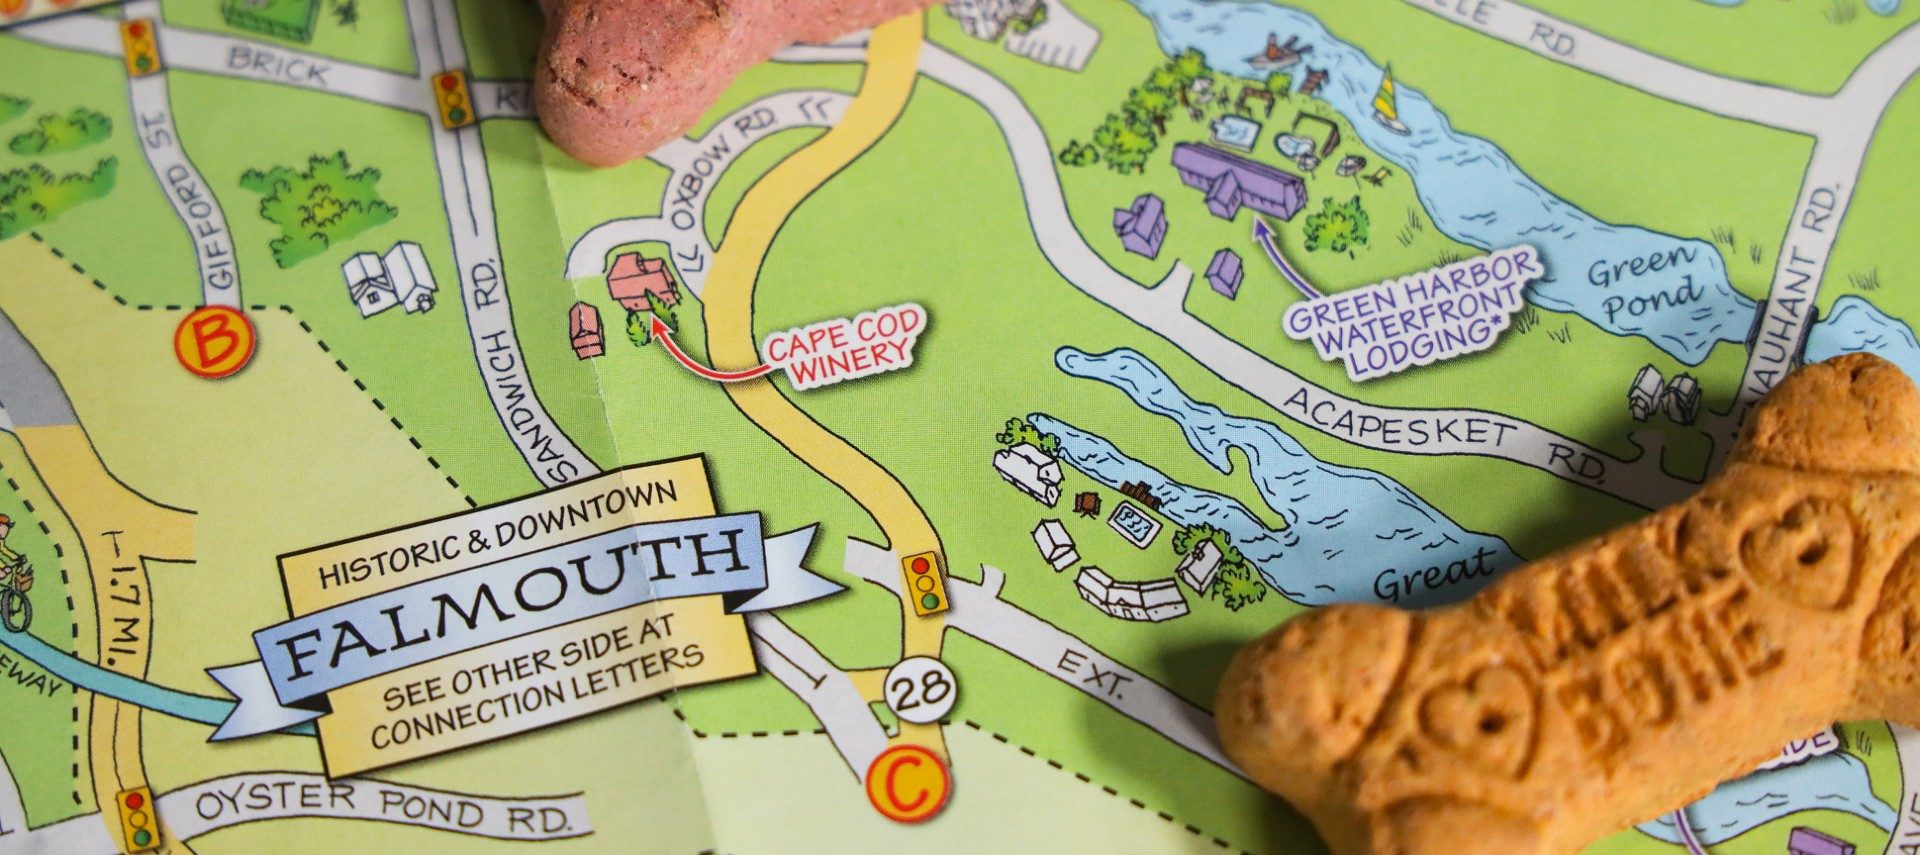 Colorful map showing streets and attractions with a milkbone dog biscuit